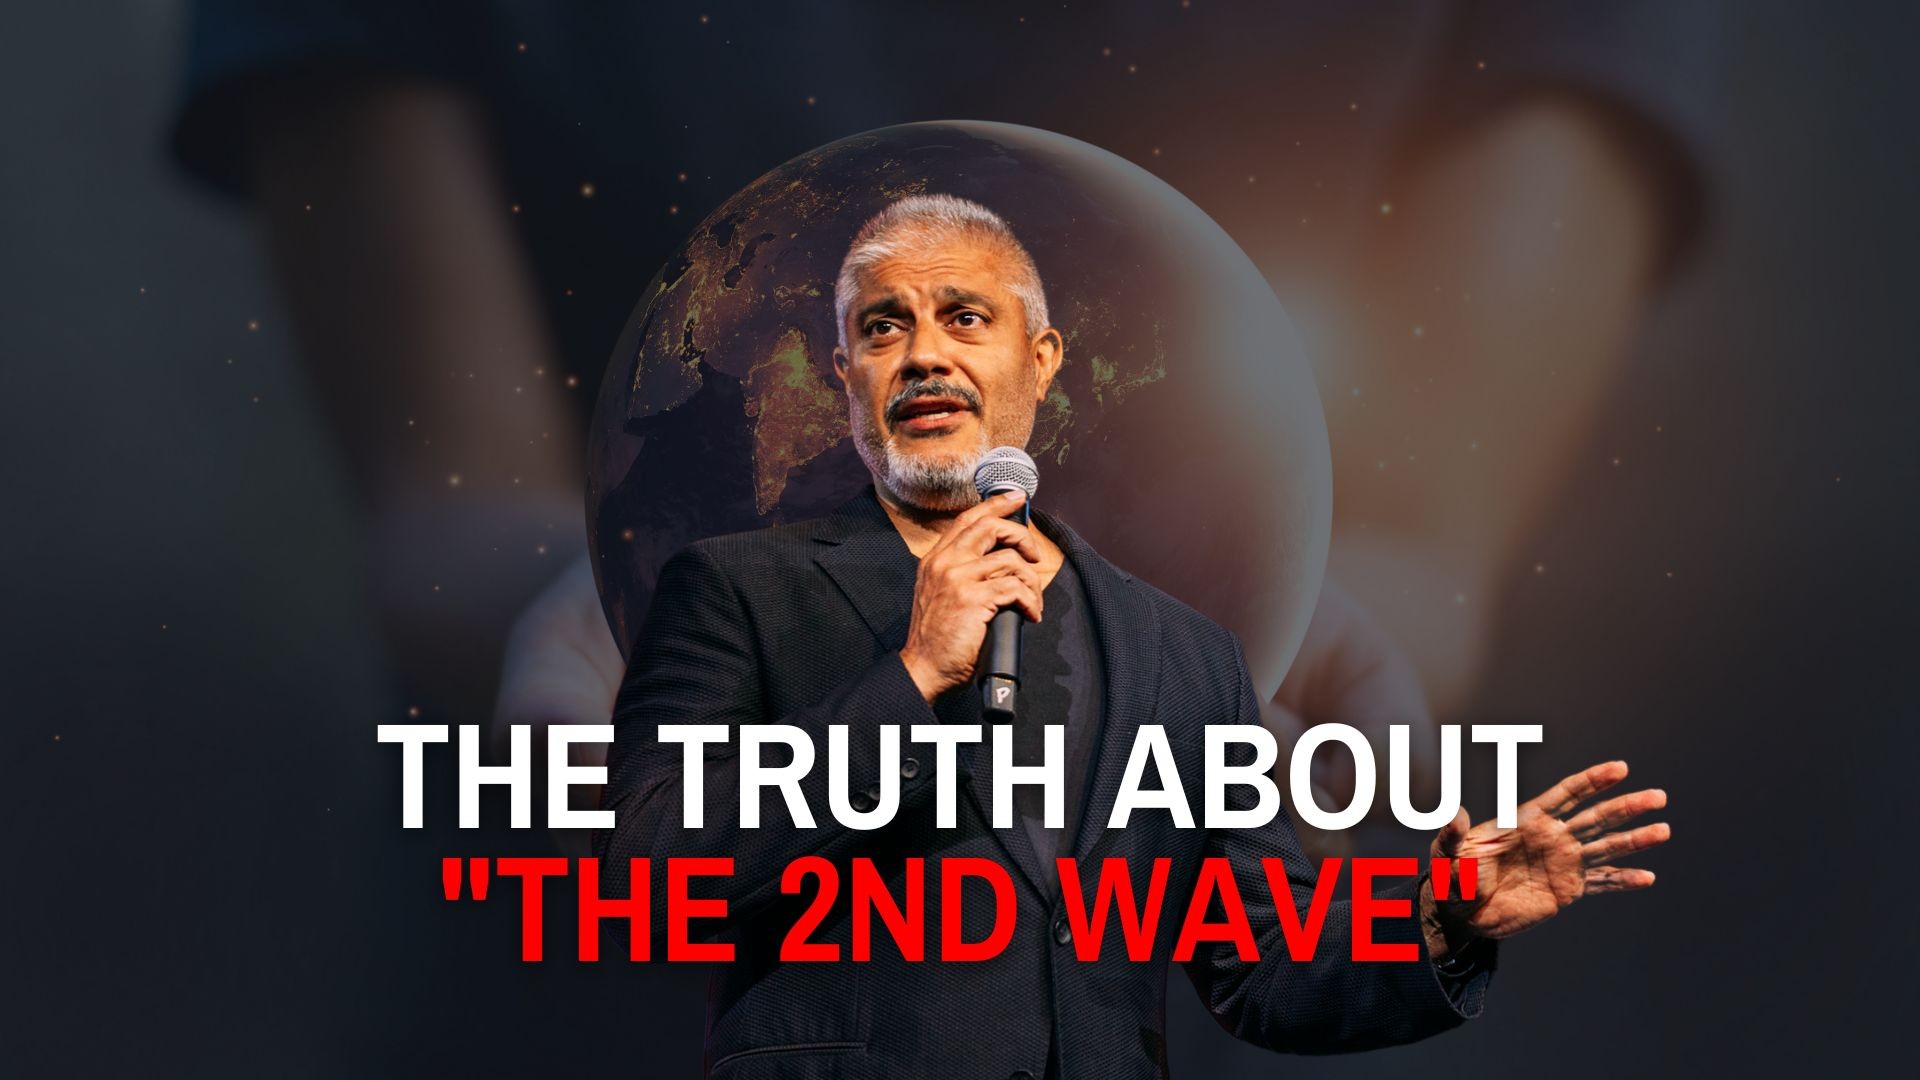 The Truth About The 2nd Wave (Bill Gates, Dr Fauci) - Dr Rashid A Buttar